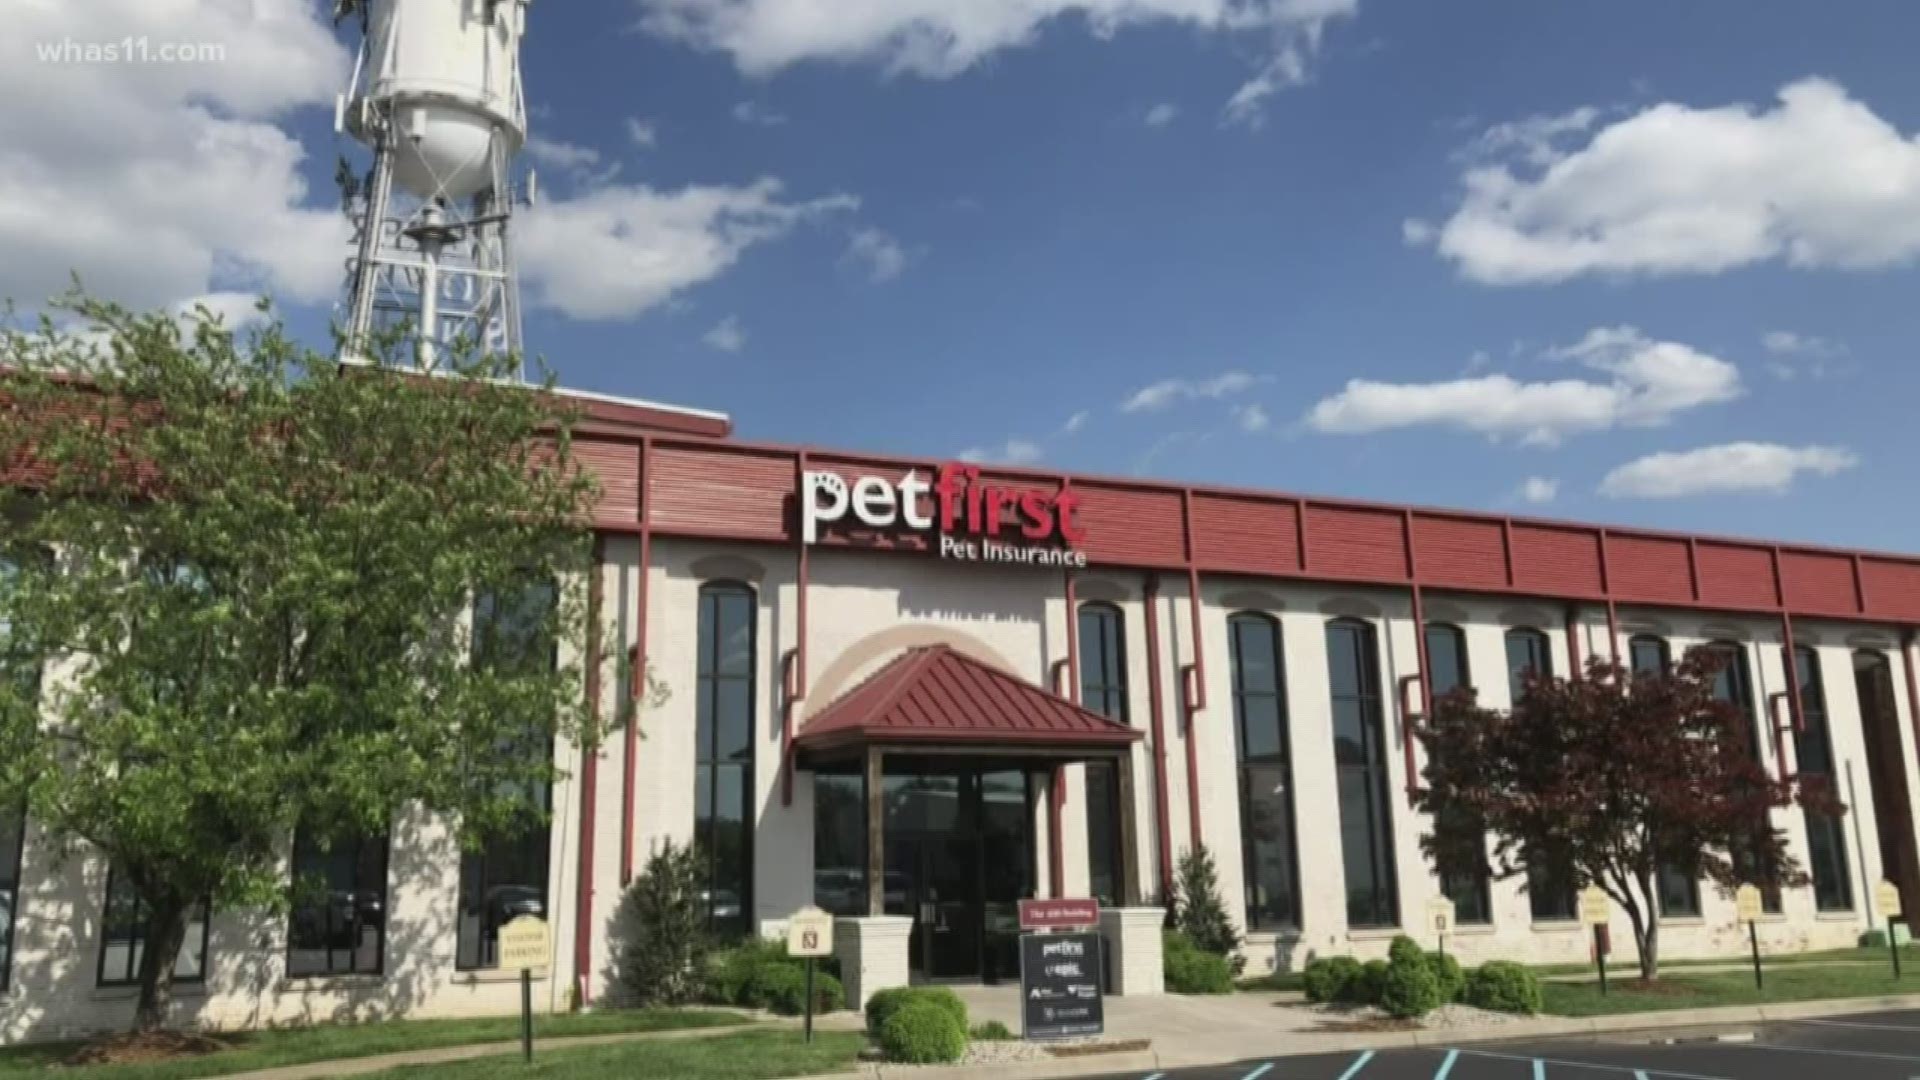 Petfirst currently employees about 60 people and all of them are expected to continue in their current positions.